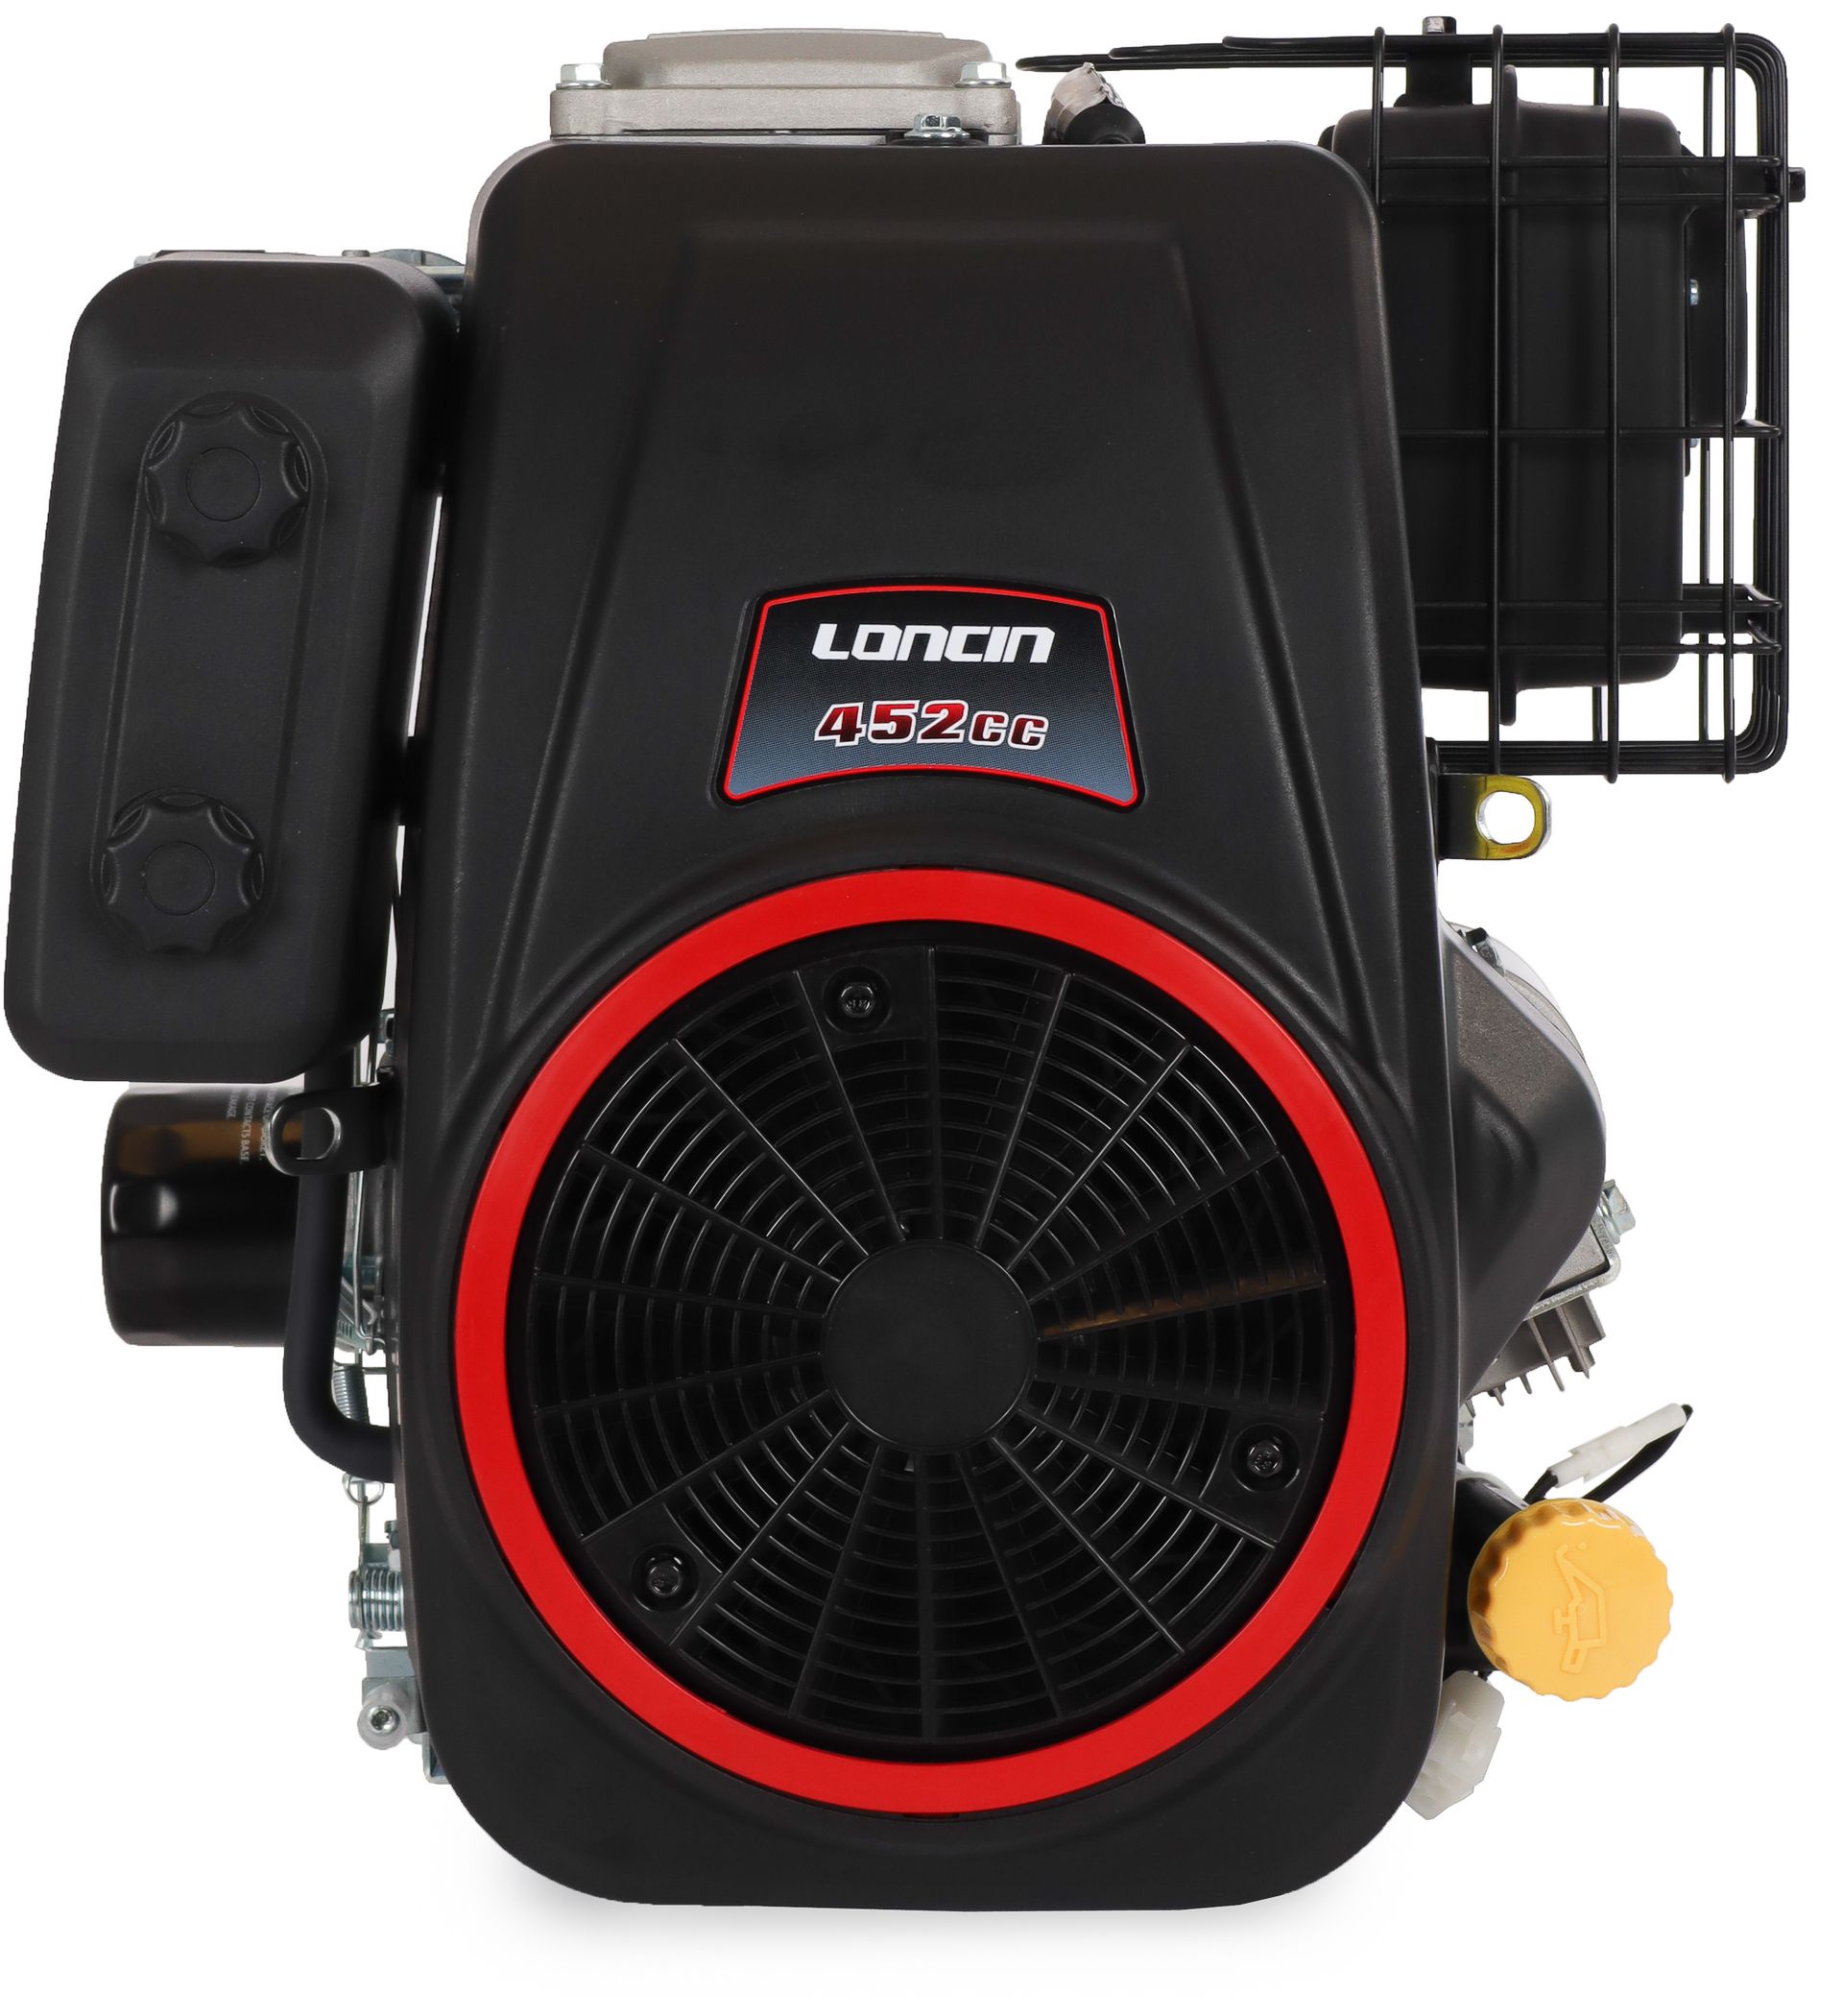 Loncin LC1P92F1 what engine it is ? Competition for Honda and Briggs & Stratton ?